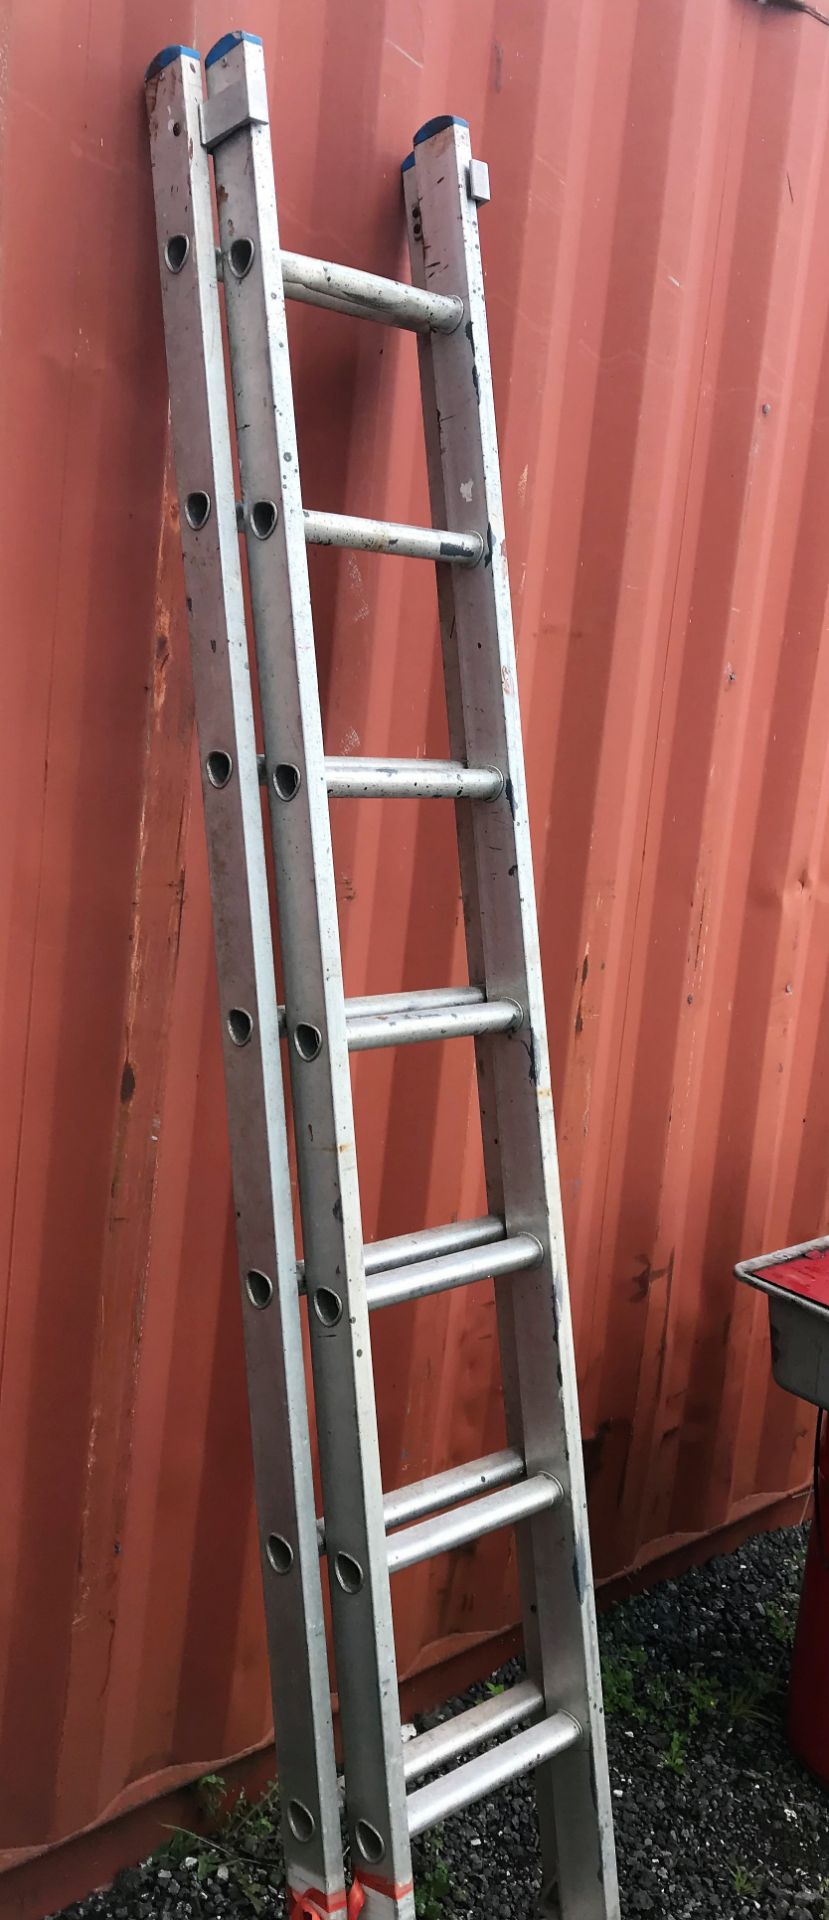 A 16 rise Alloy Double Extension Ladder-located at